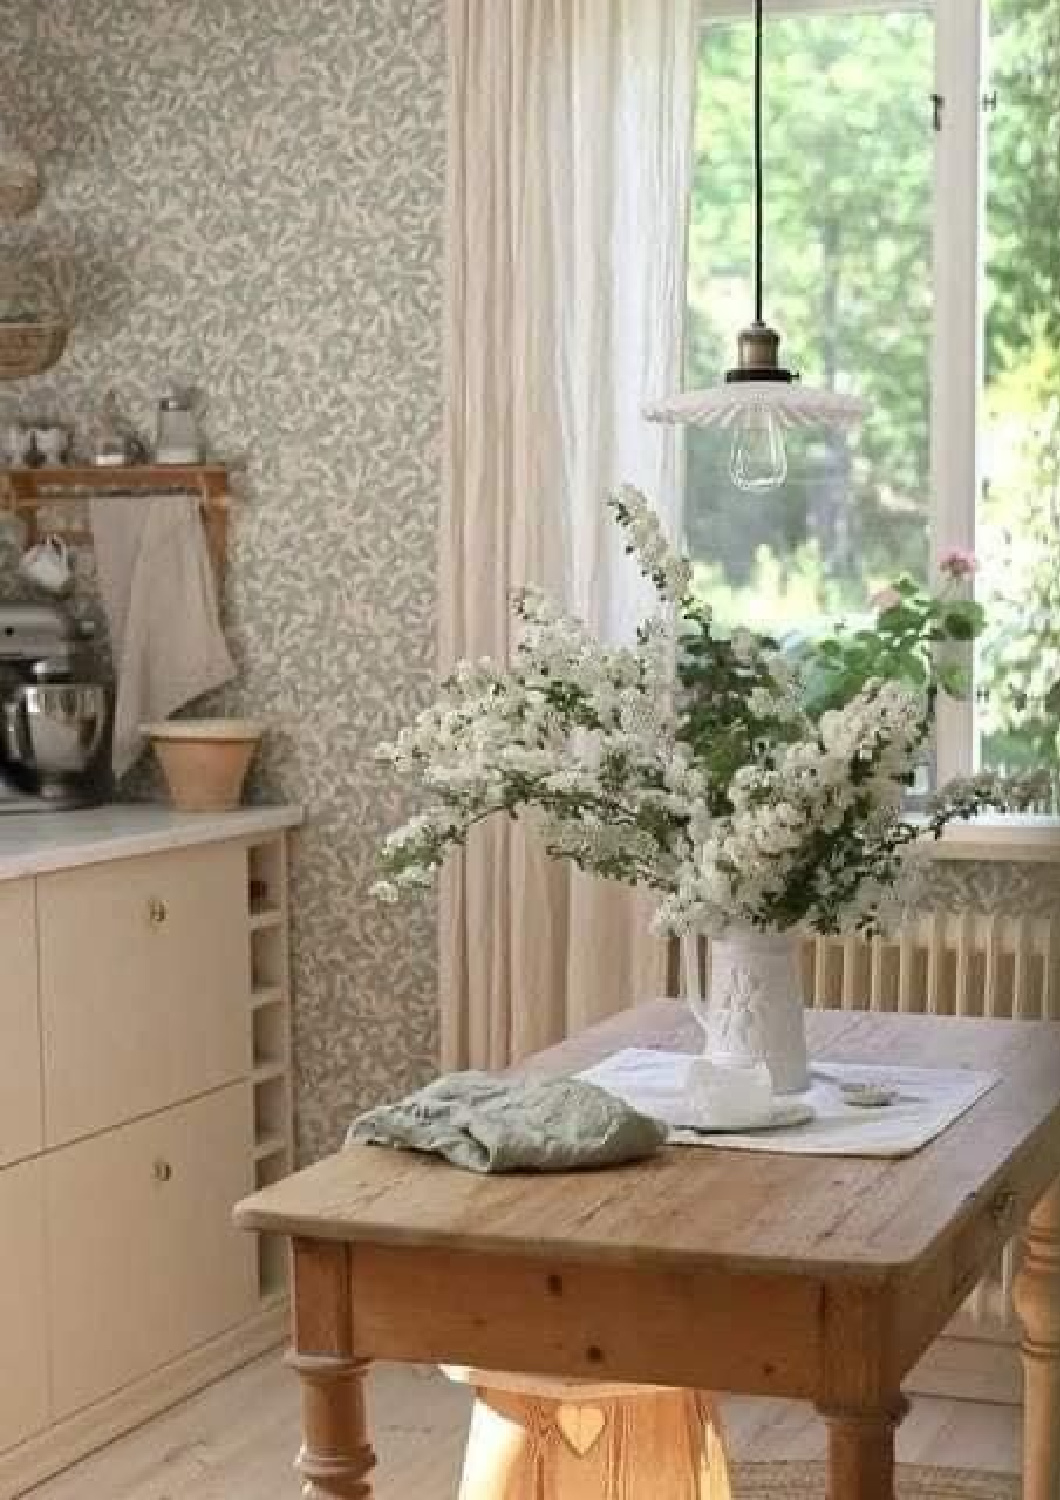 Cozy European country cottage kitchen with romantic vintage details - via Nikkisplate. #europeancountry #cozykitchens